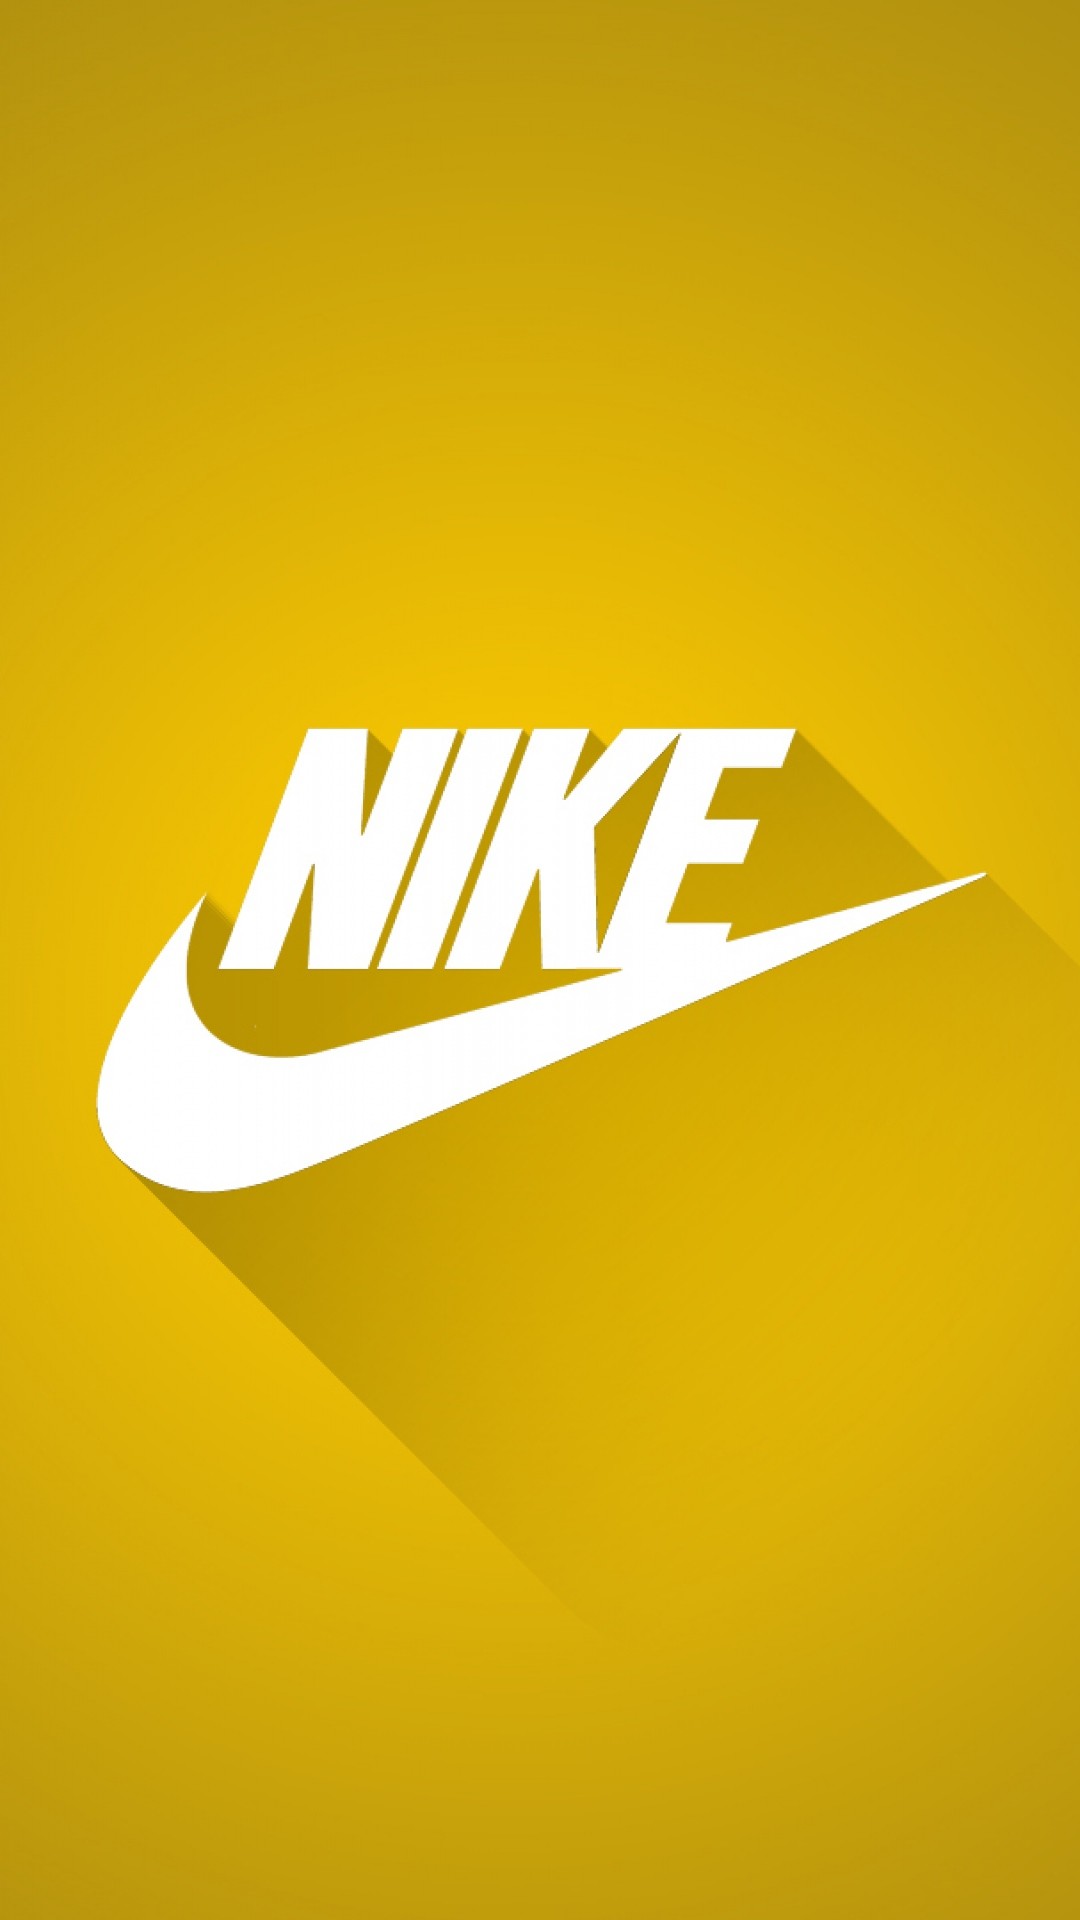 1080x1920 wallpaper.wiki-Nike-Wallpaper-for-Iphone-Free-Download-